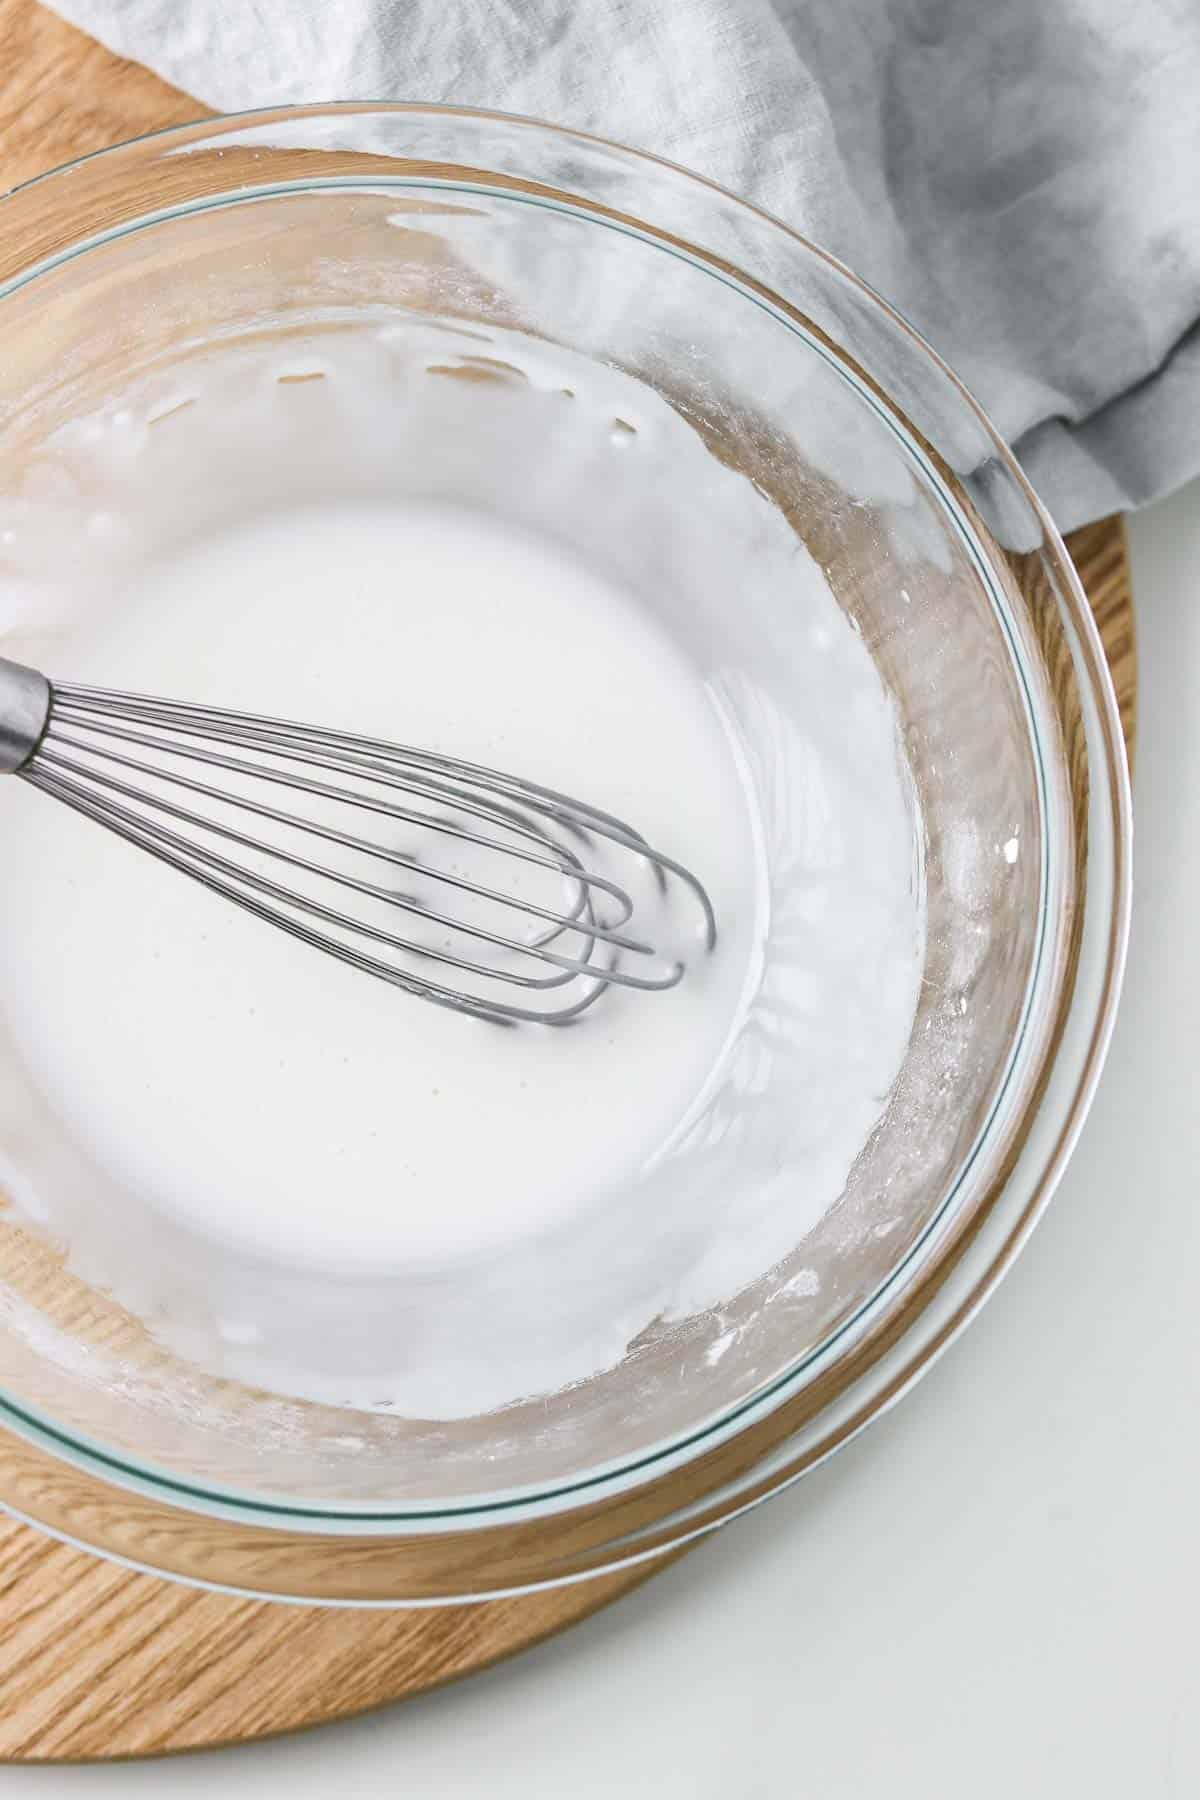 Powdered sugar glaze in a glass bowl with a whisk.